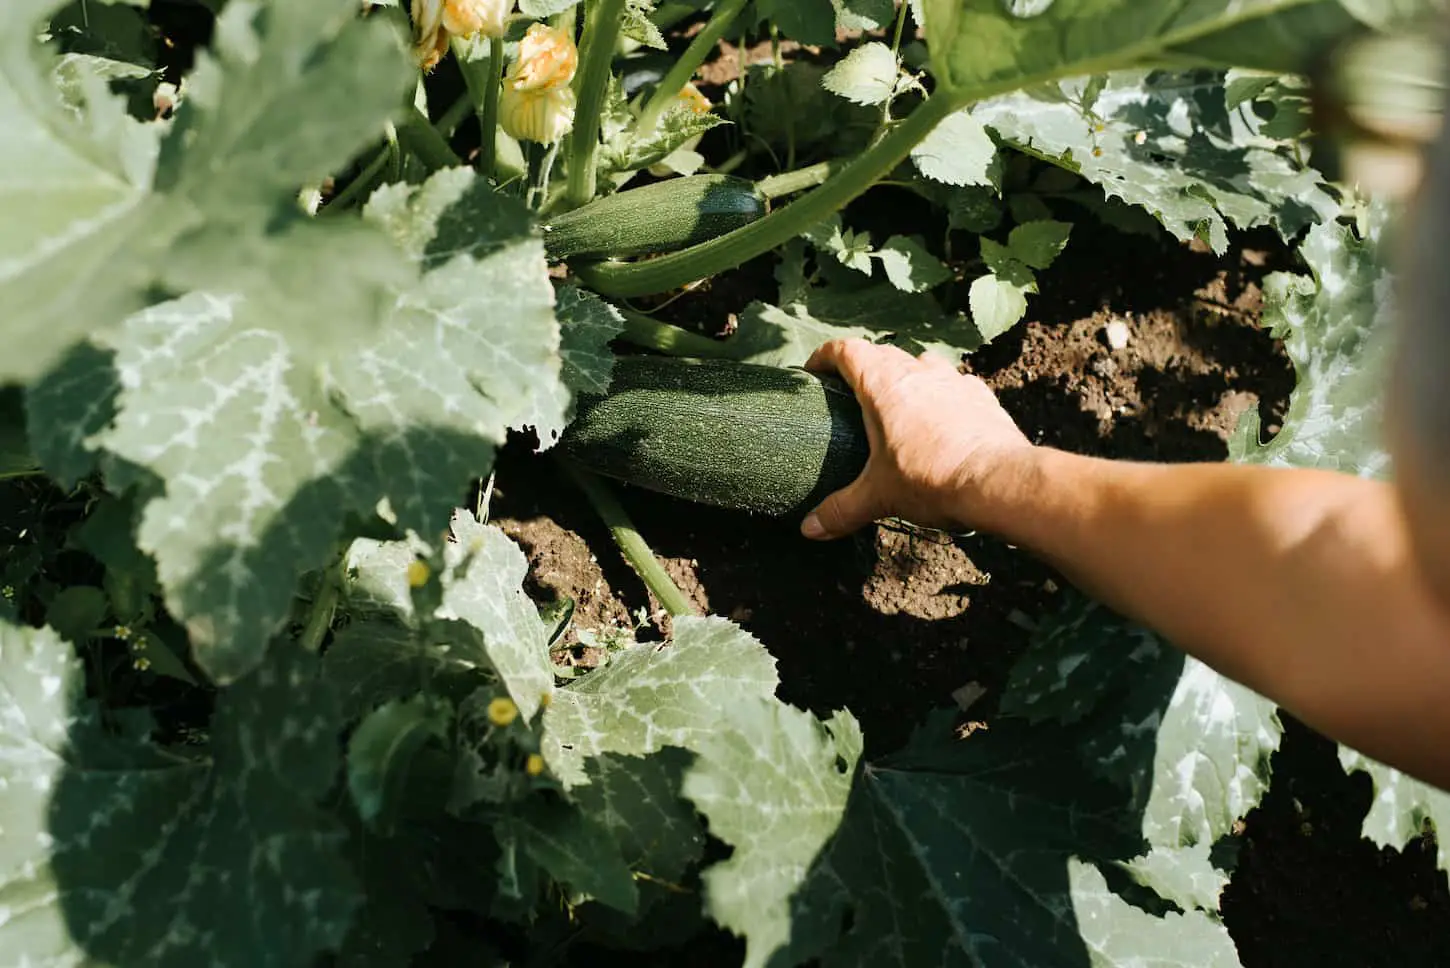 A close-up image of a woman farmer harvesting in the vegetable garden, a female hand holding zucchini outdoors.